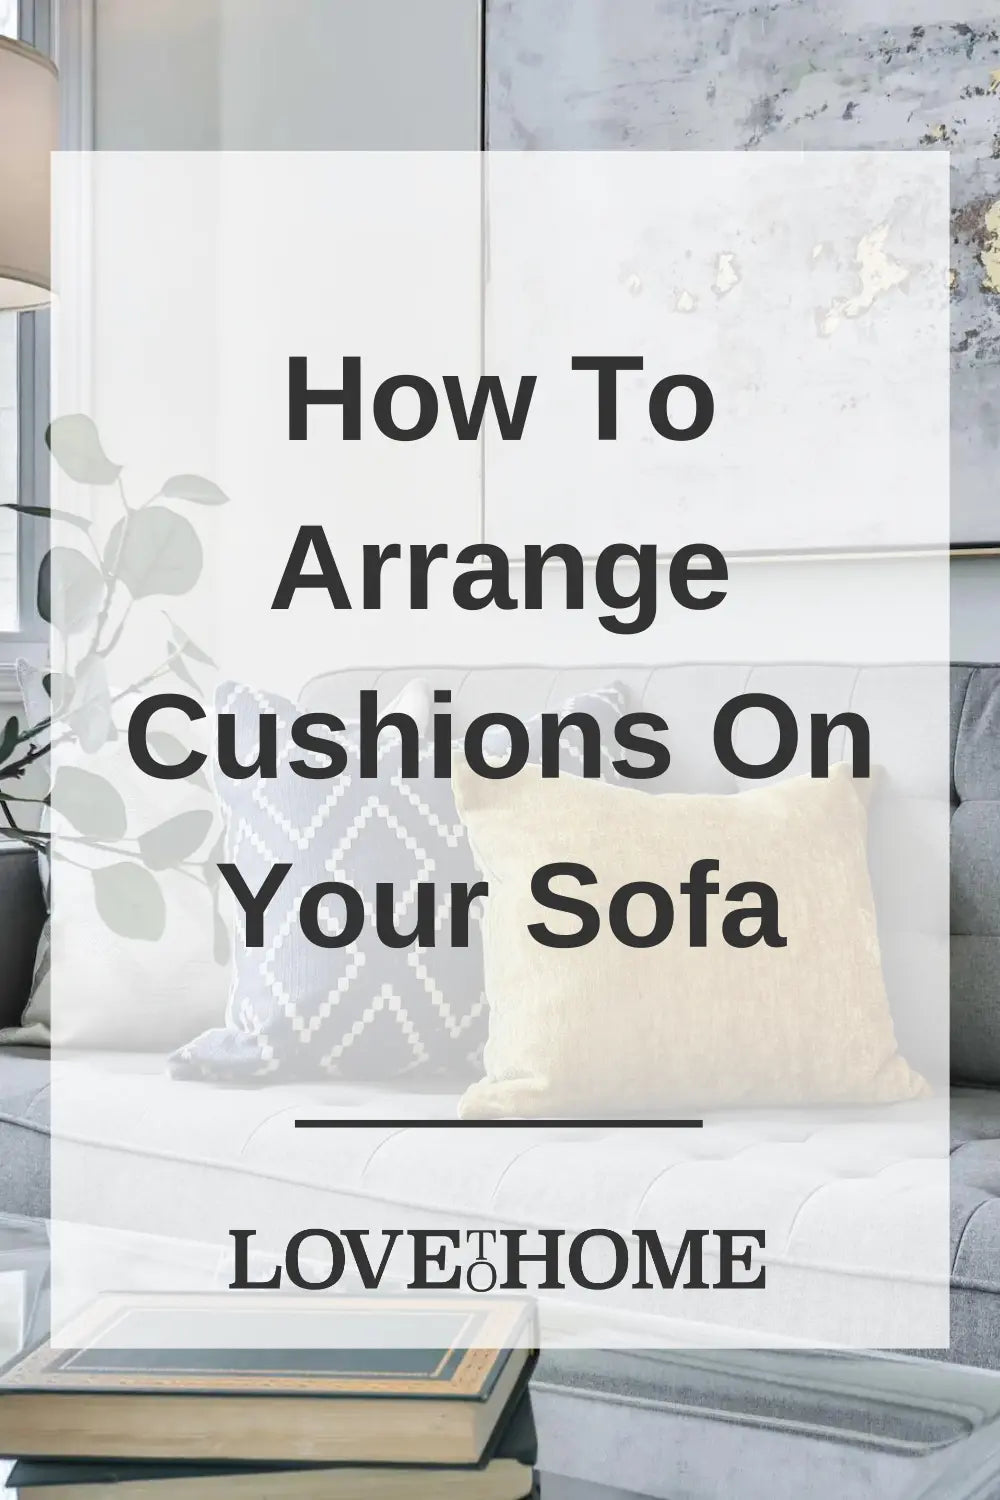 How To Arrange Cushions On Your Sofa by Love to Home